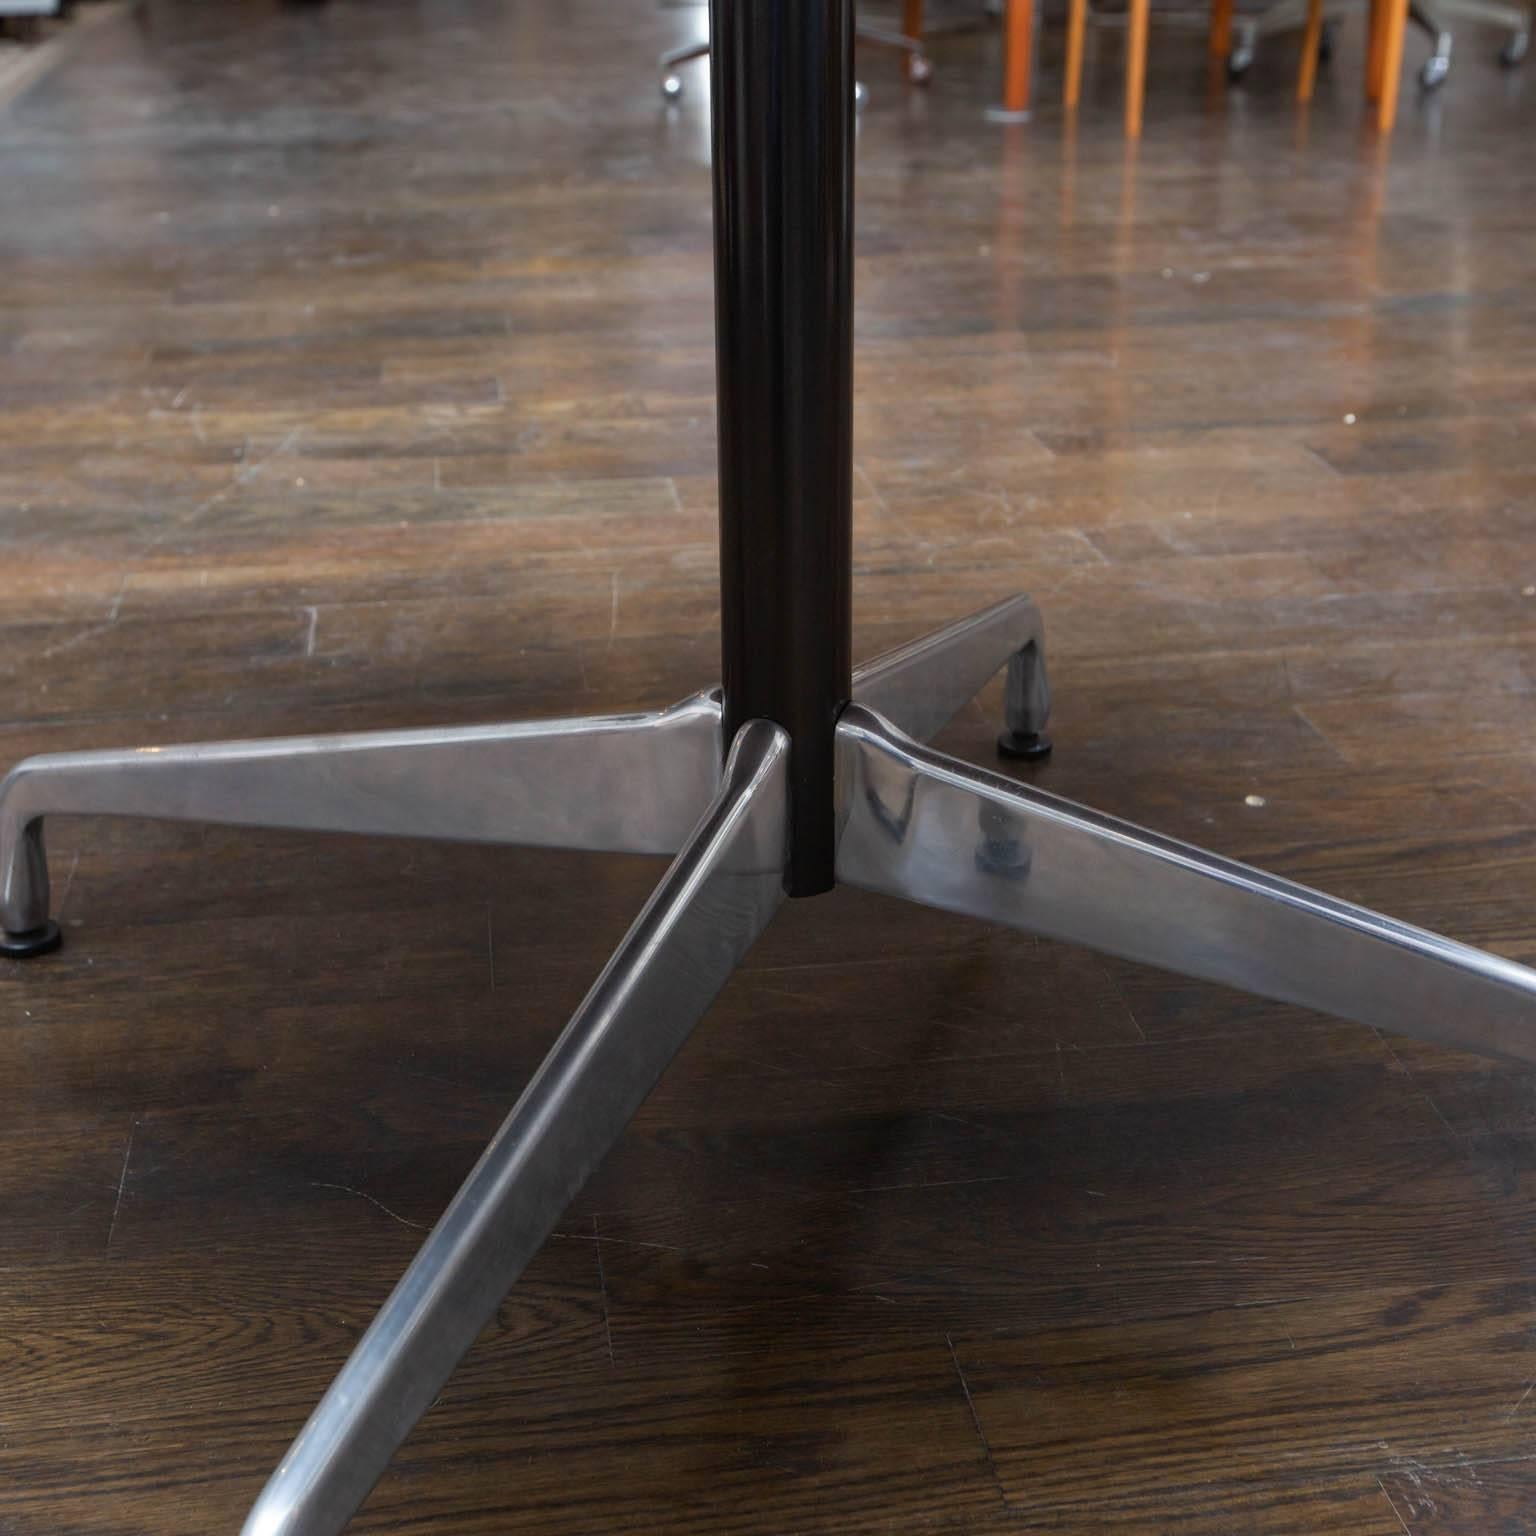 Eames design for Herman Miller Features aluminum star base and wood laminate top. Measures: 42